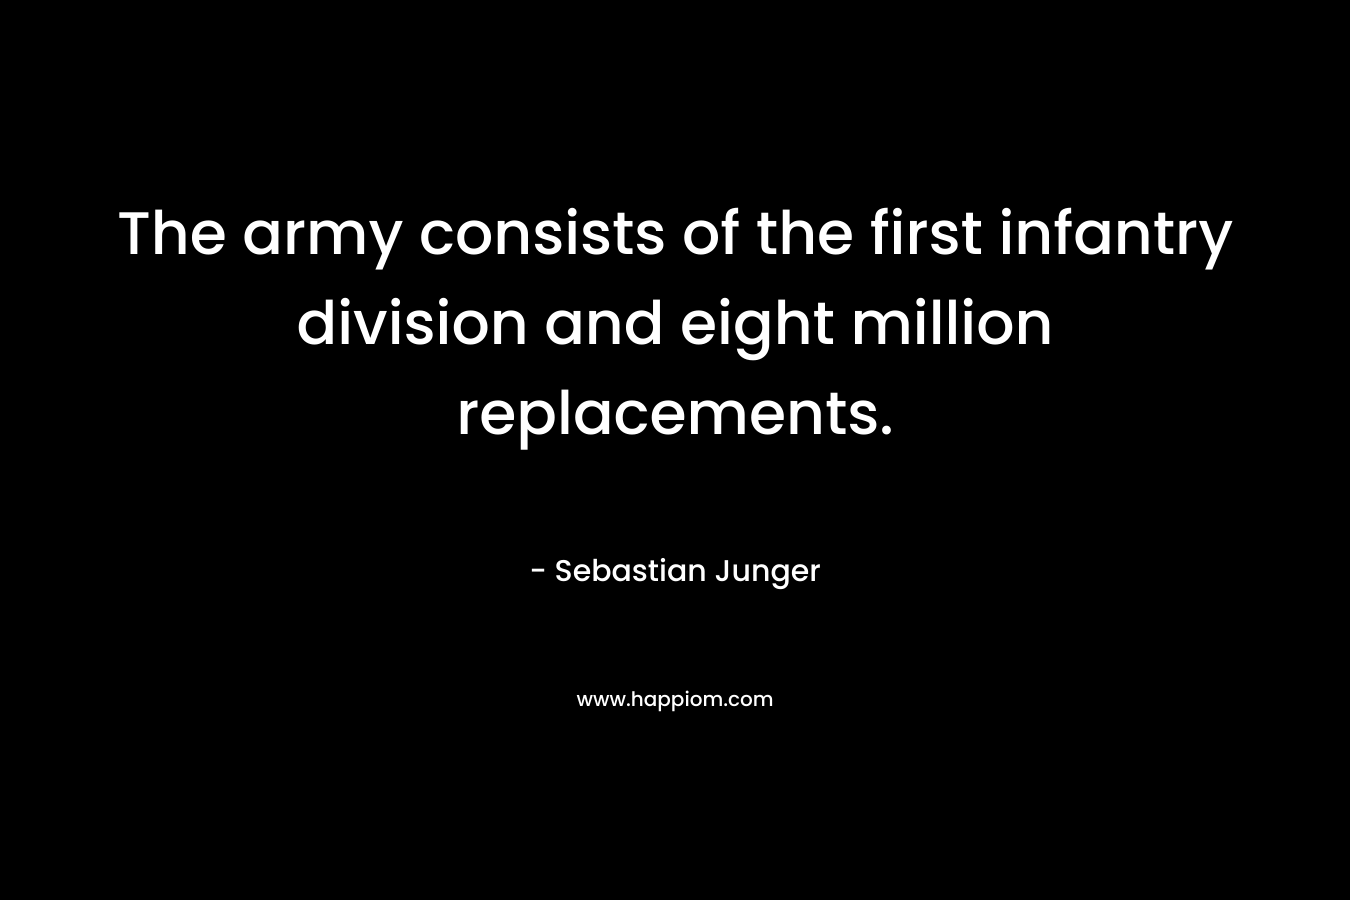 The army consists of the first infantry division and eight million replacements. – Sebastian Junger